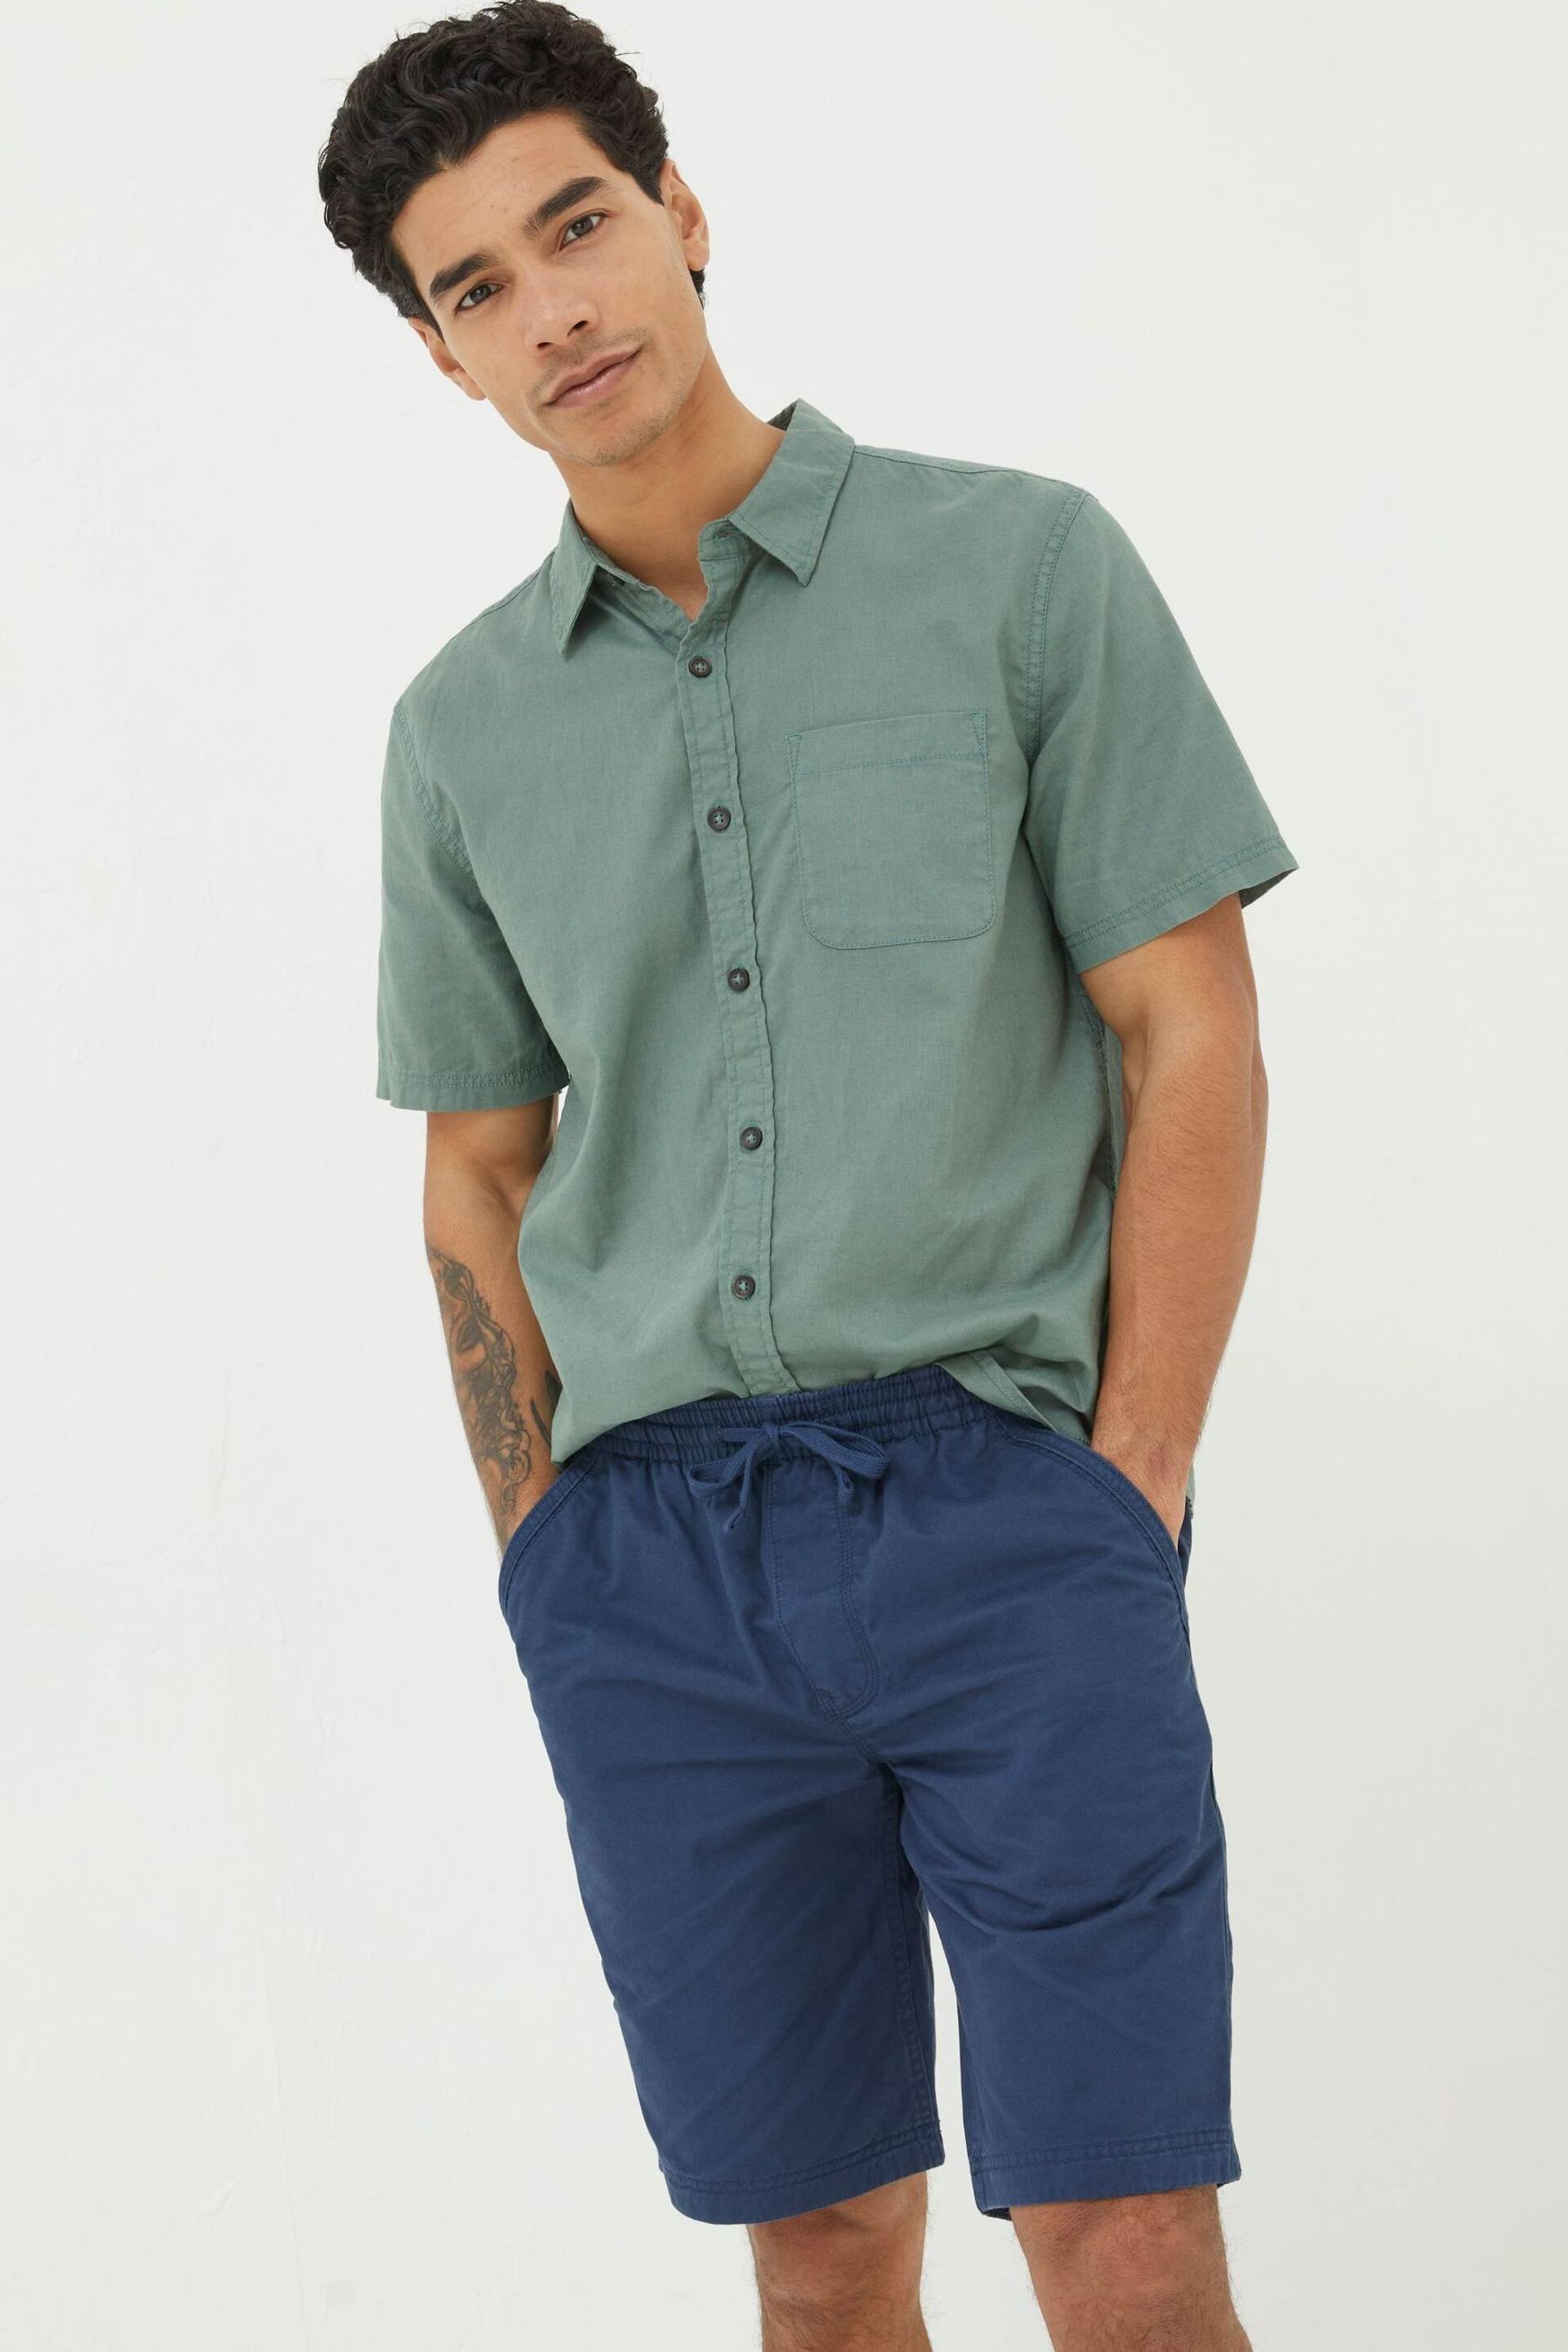 FatFace Blue Seaton Pull On Shorts - Image 1 of 2